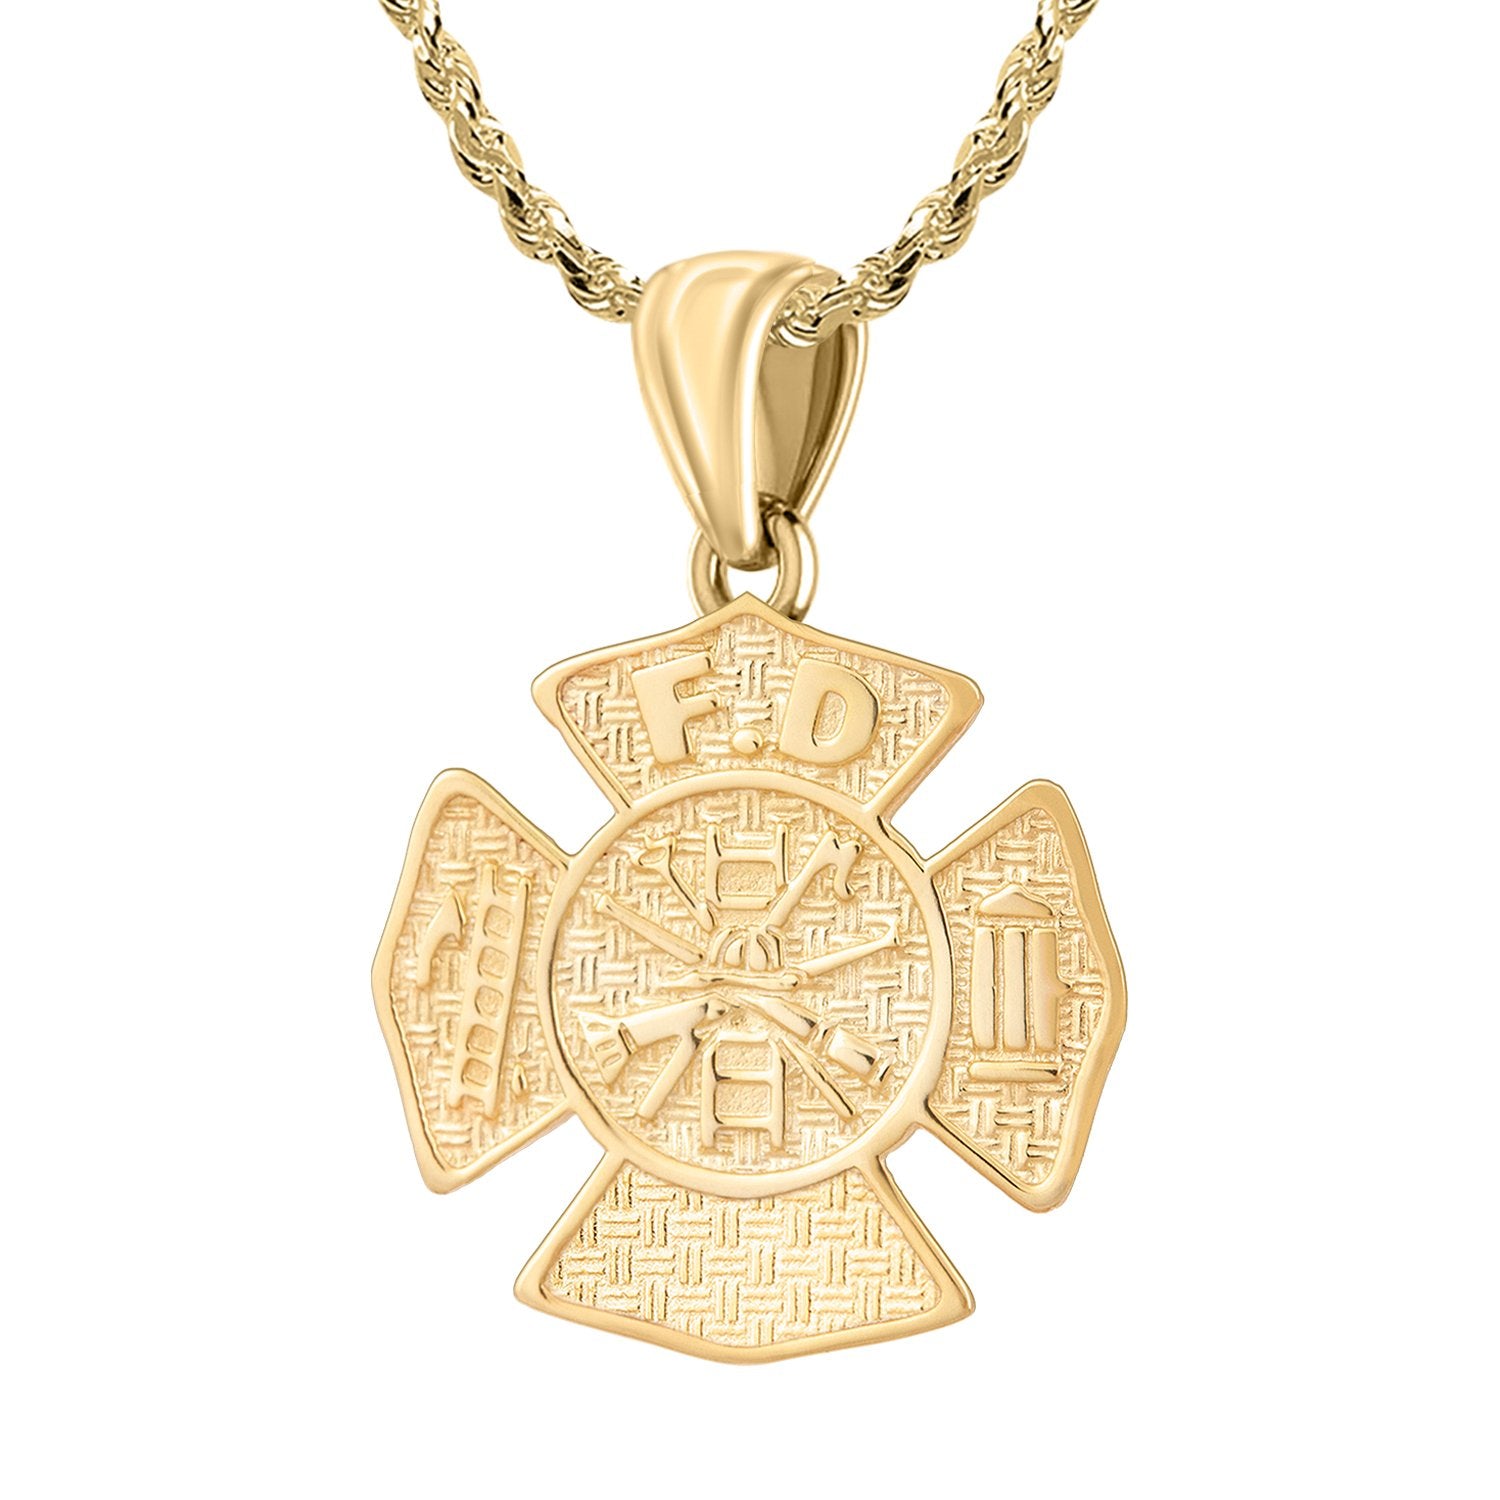 Firefighter Necklace of 26mm in 14k Gold - 2mm Rope Chain